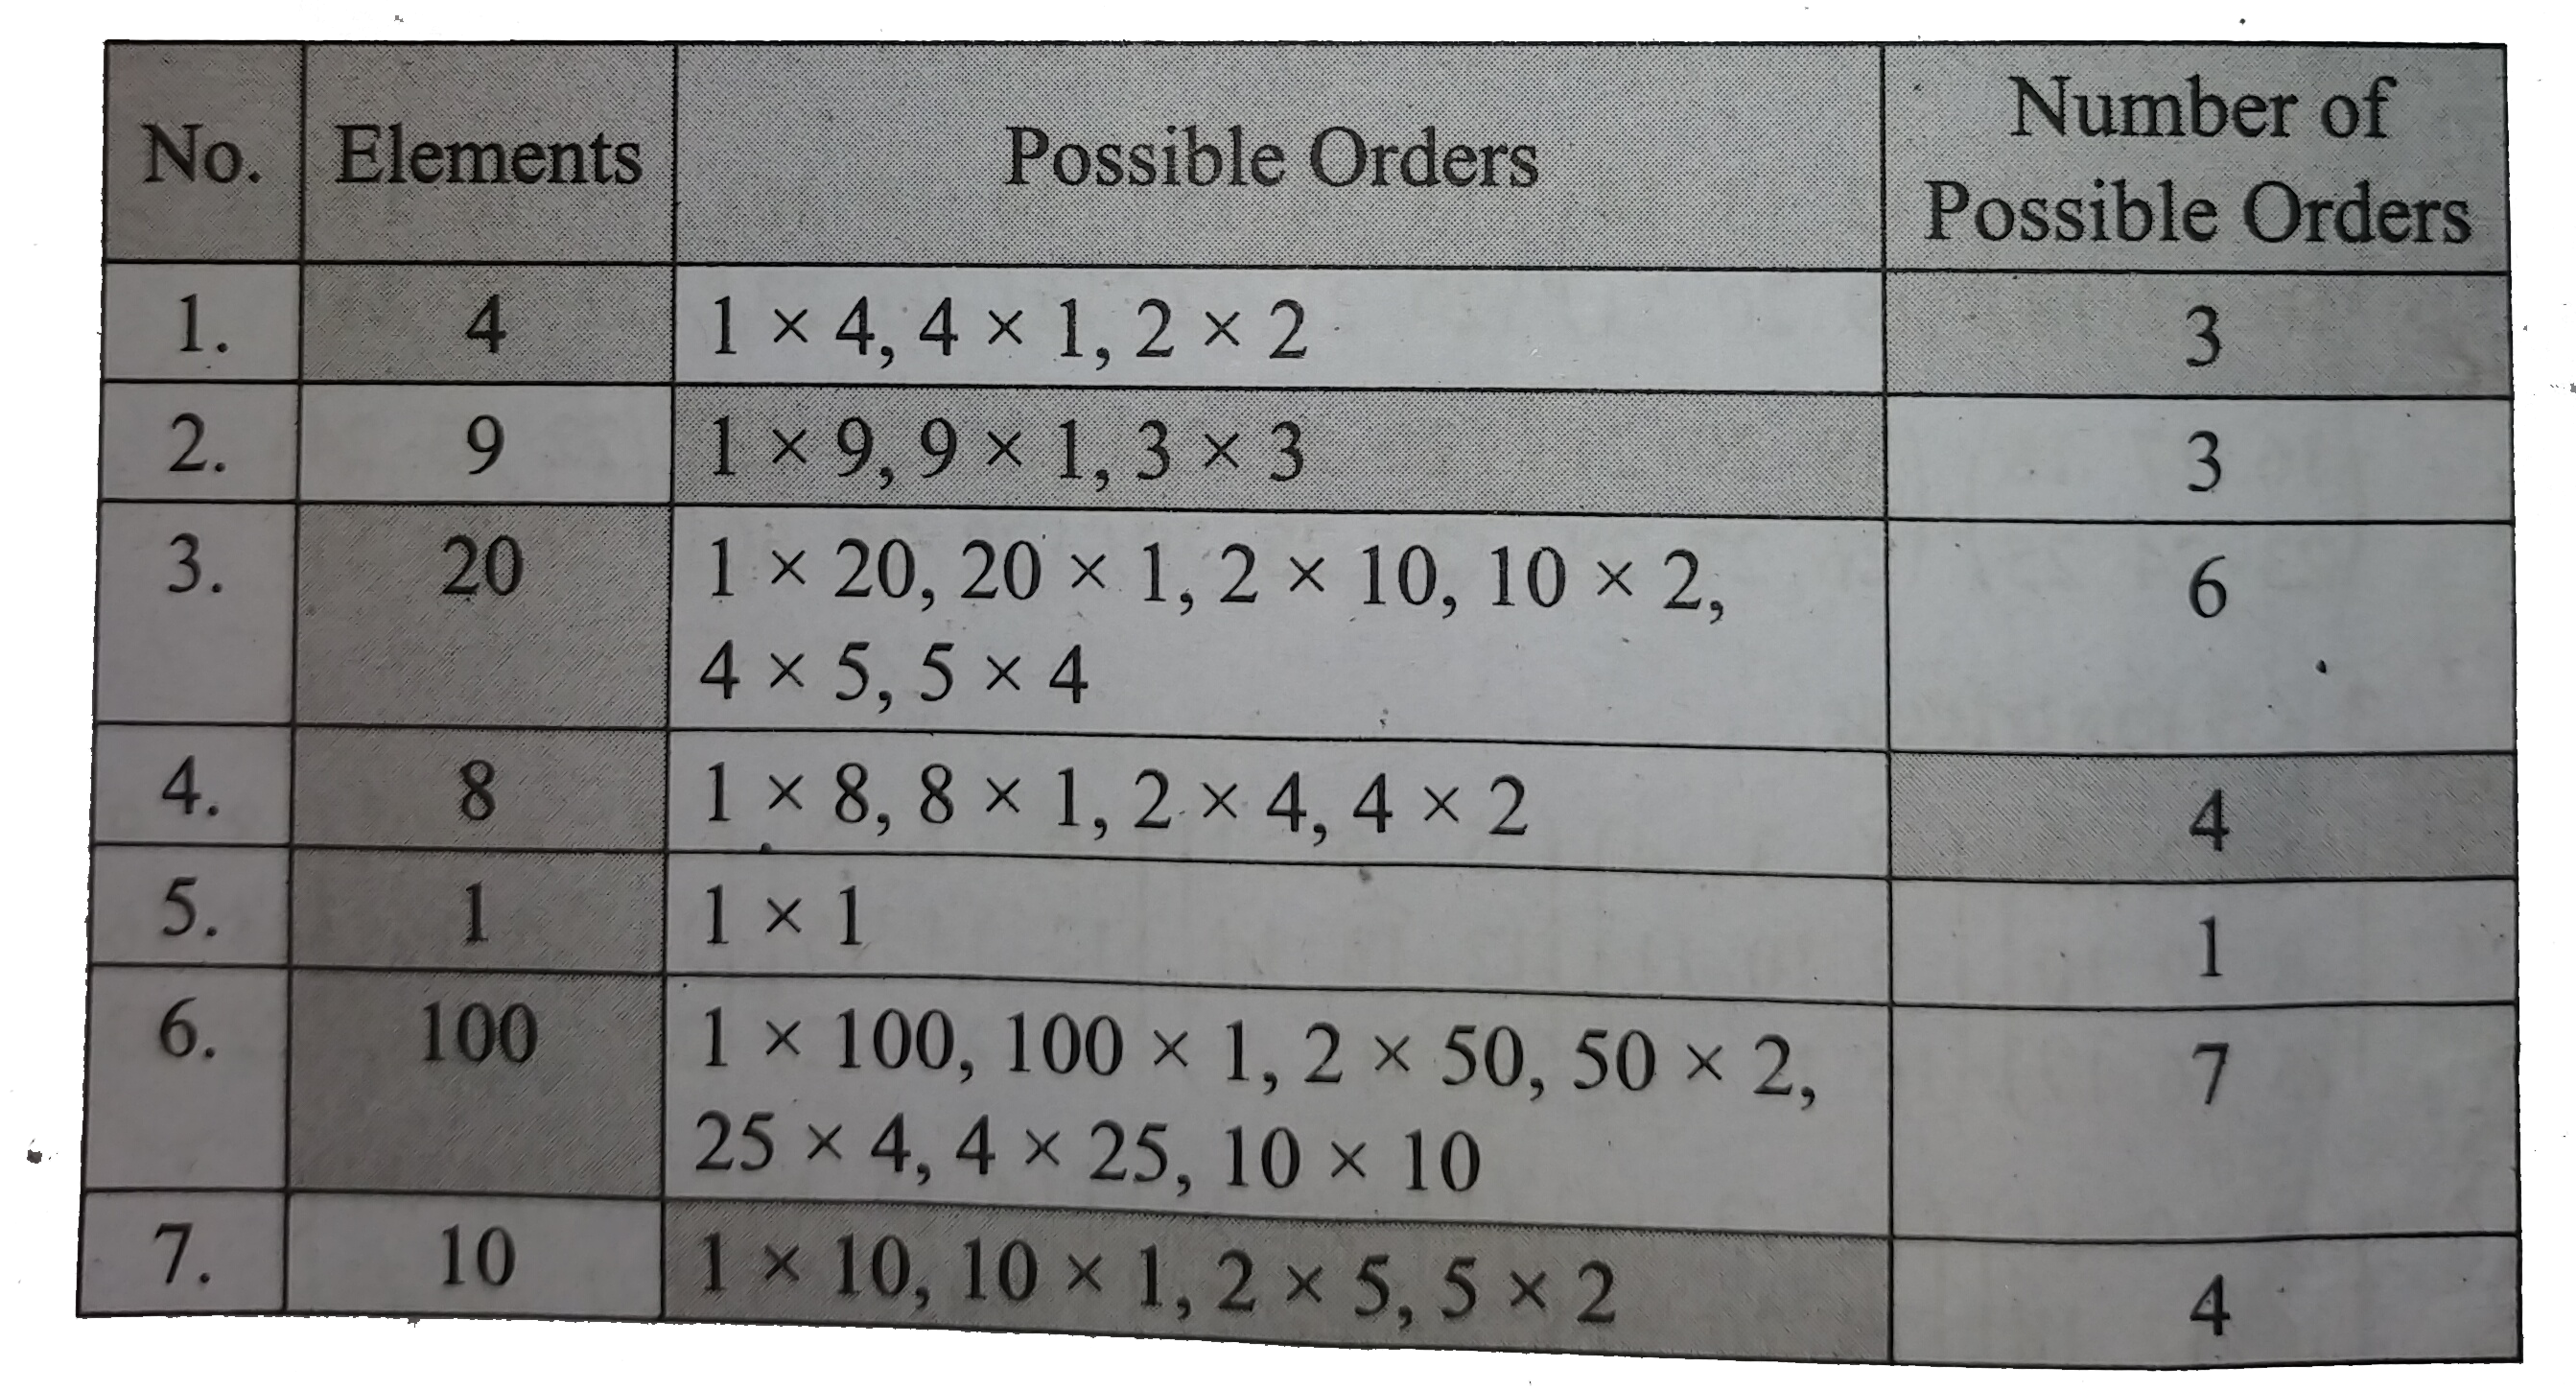 Do you find any relationship between number of elements (second column) and number of possible orders (fourth column)? If so, what is it ?